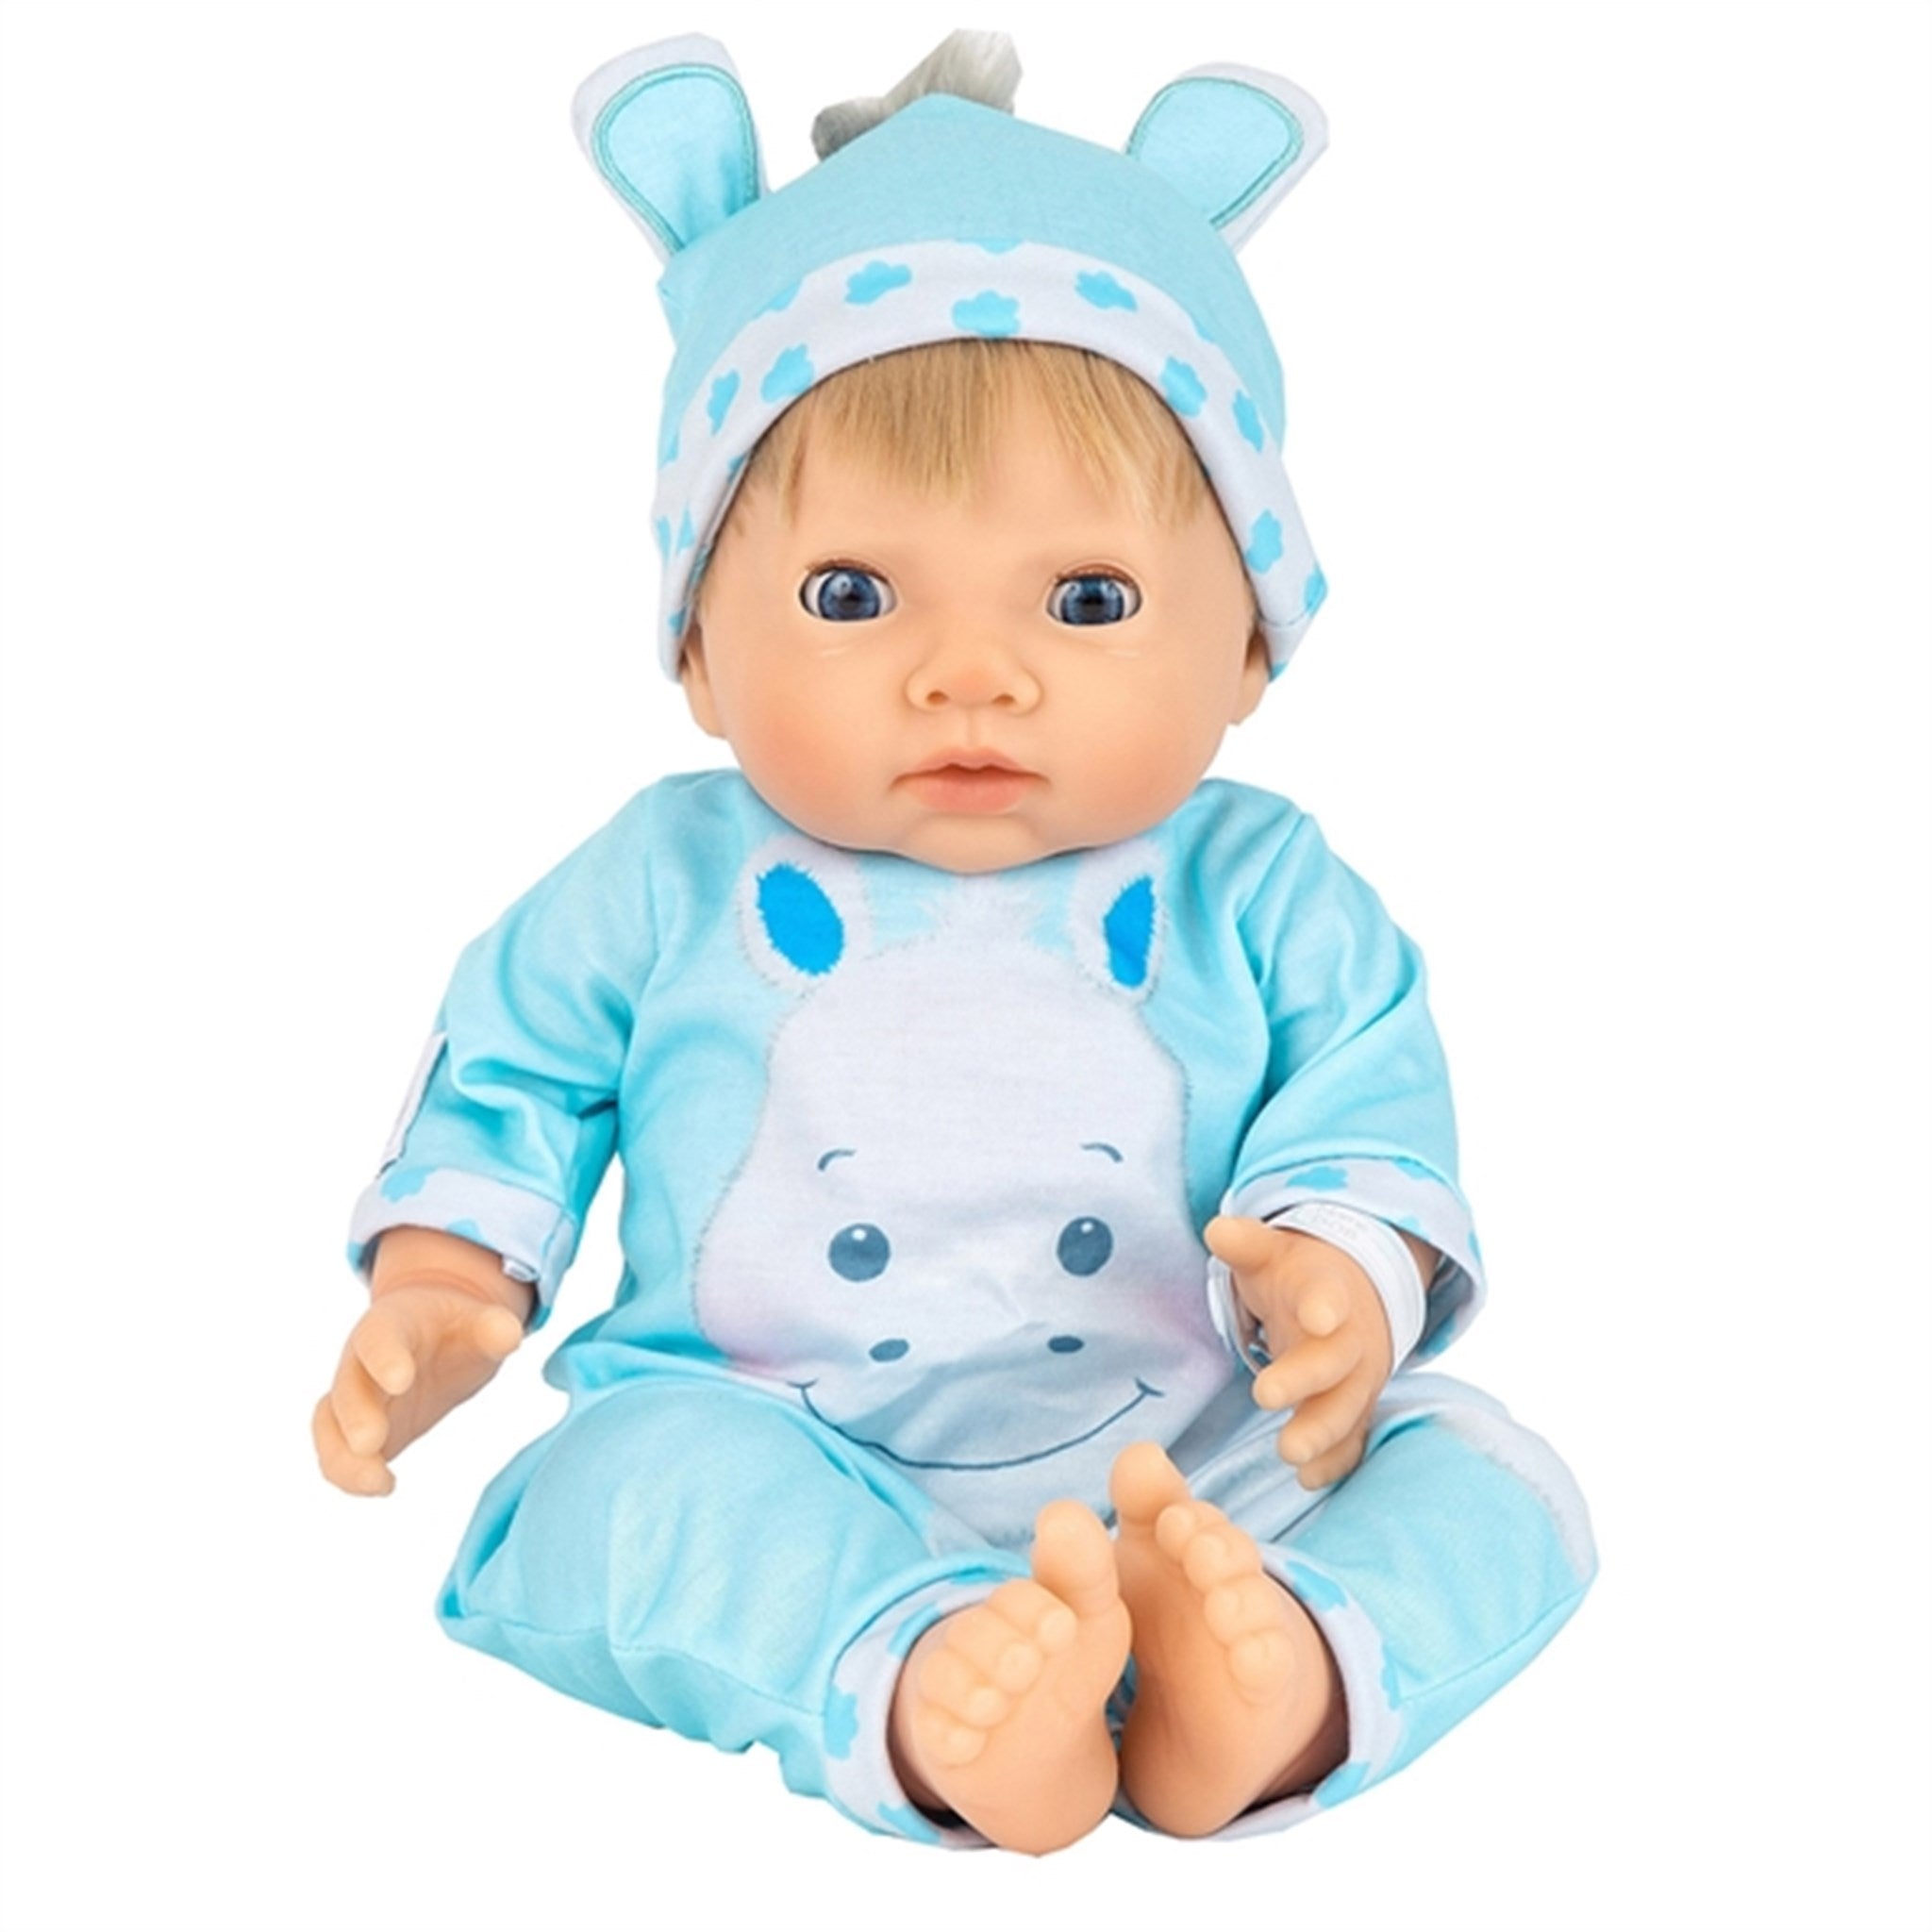 Tiny Treasure Blond Haired Doll Hippo Outfit 7